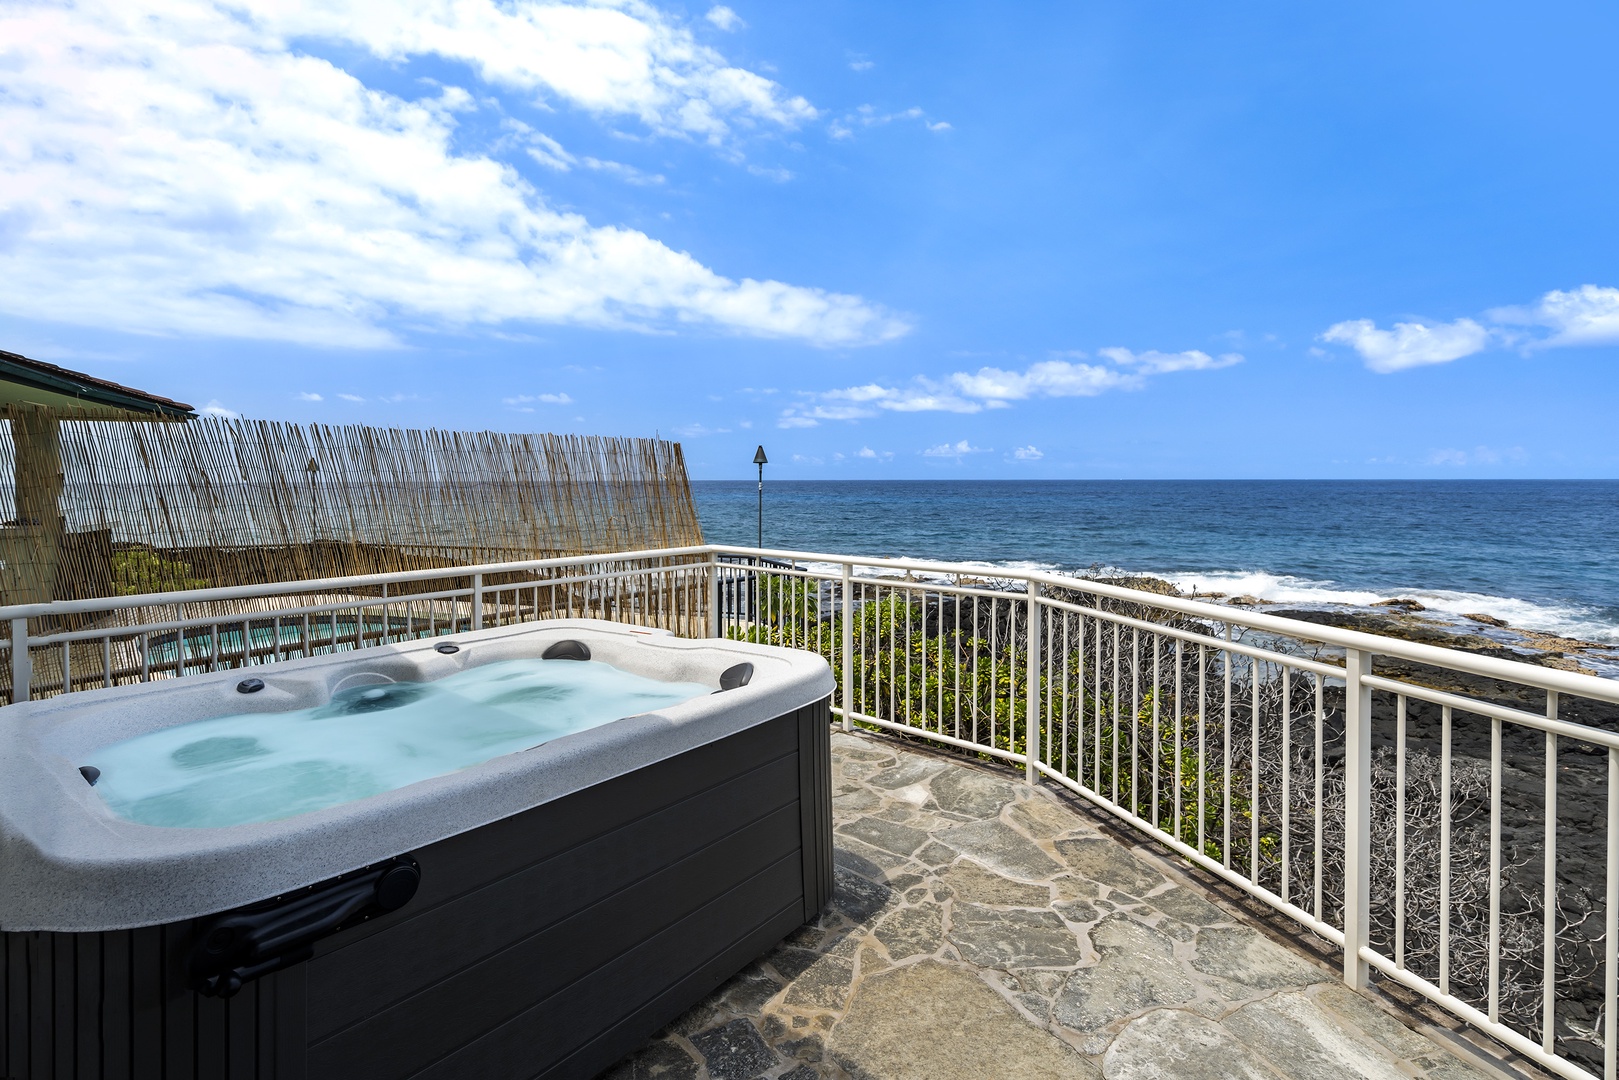 Kailua Kona Vacation Rentals, Ali'i Point #12 - Views of the blue pacific as far as the eyes can see!